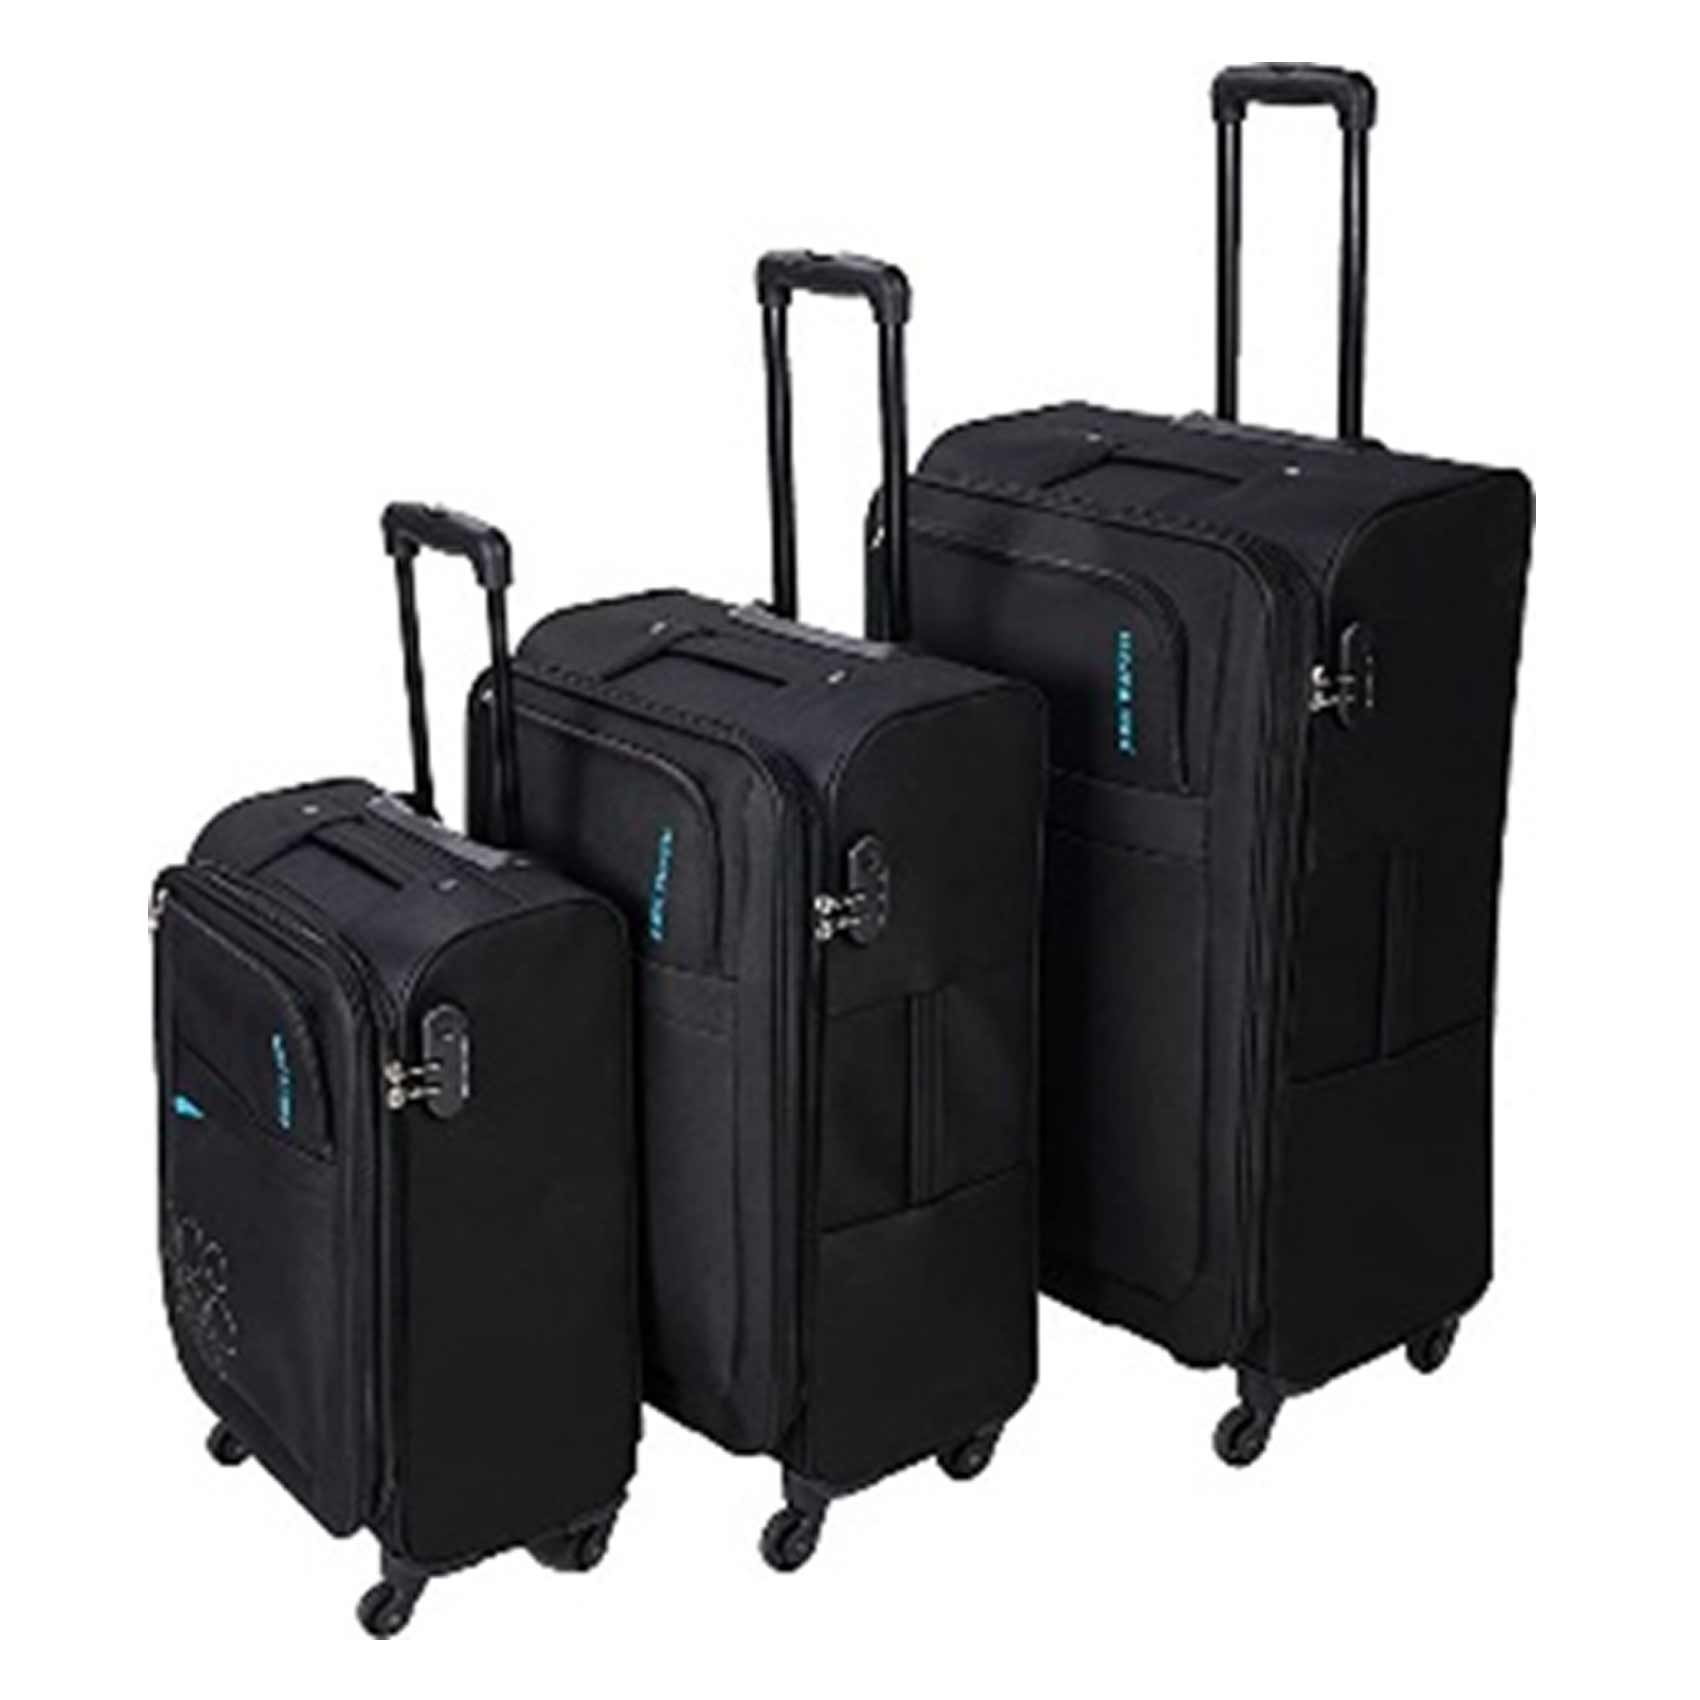 Kamiliant Spinner Luggage Trolley Bag Set Of 3 Pieces - Black